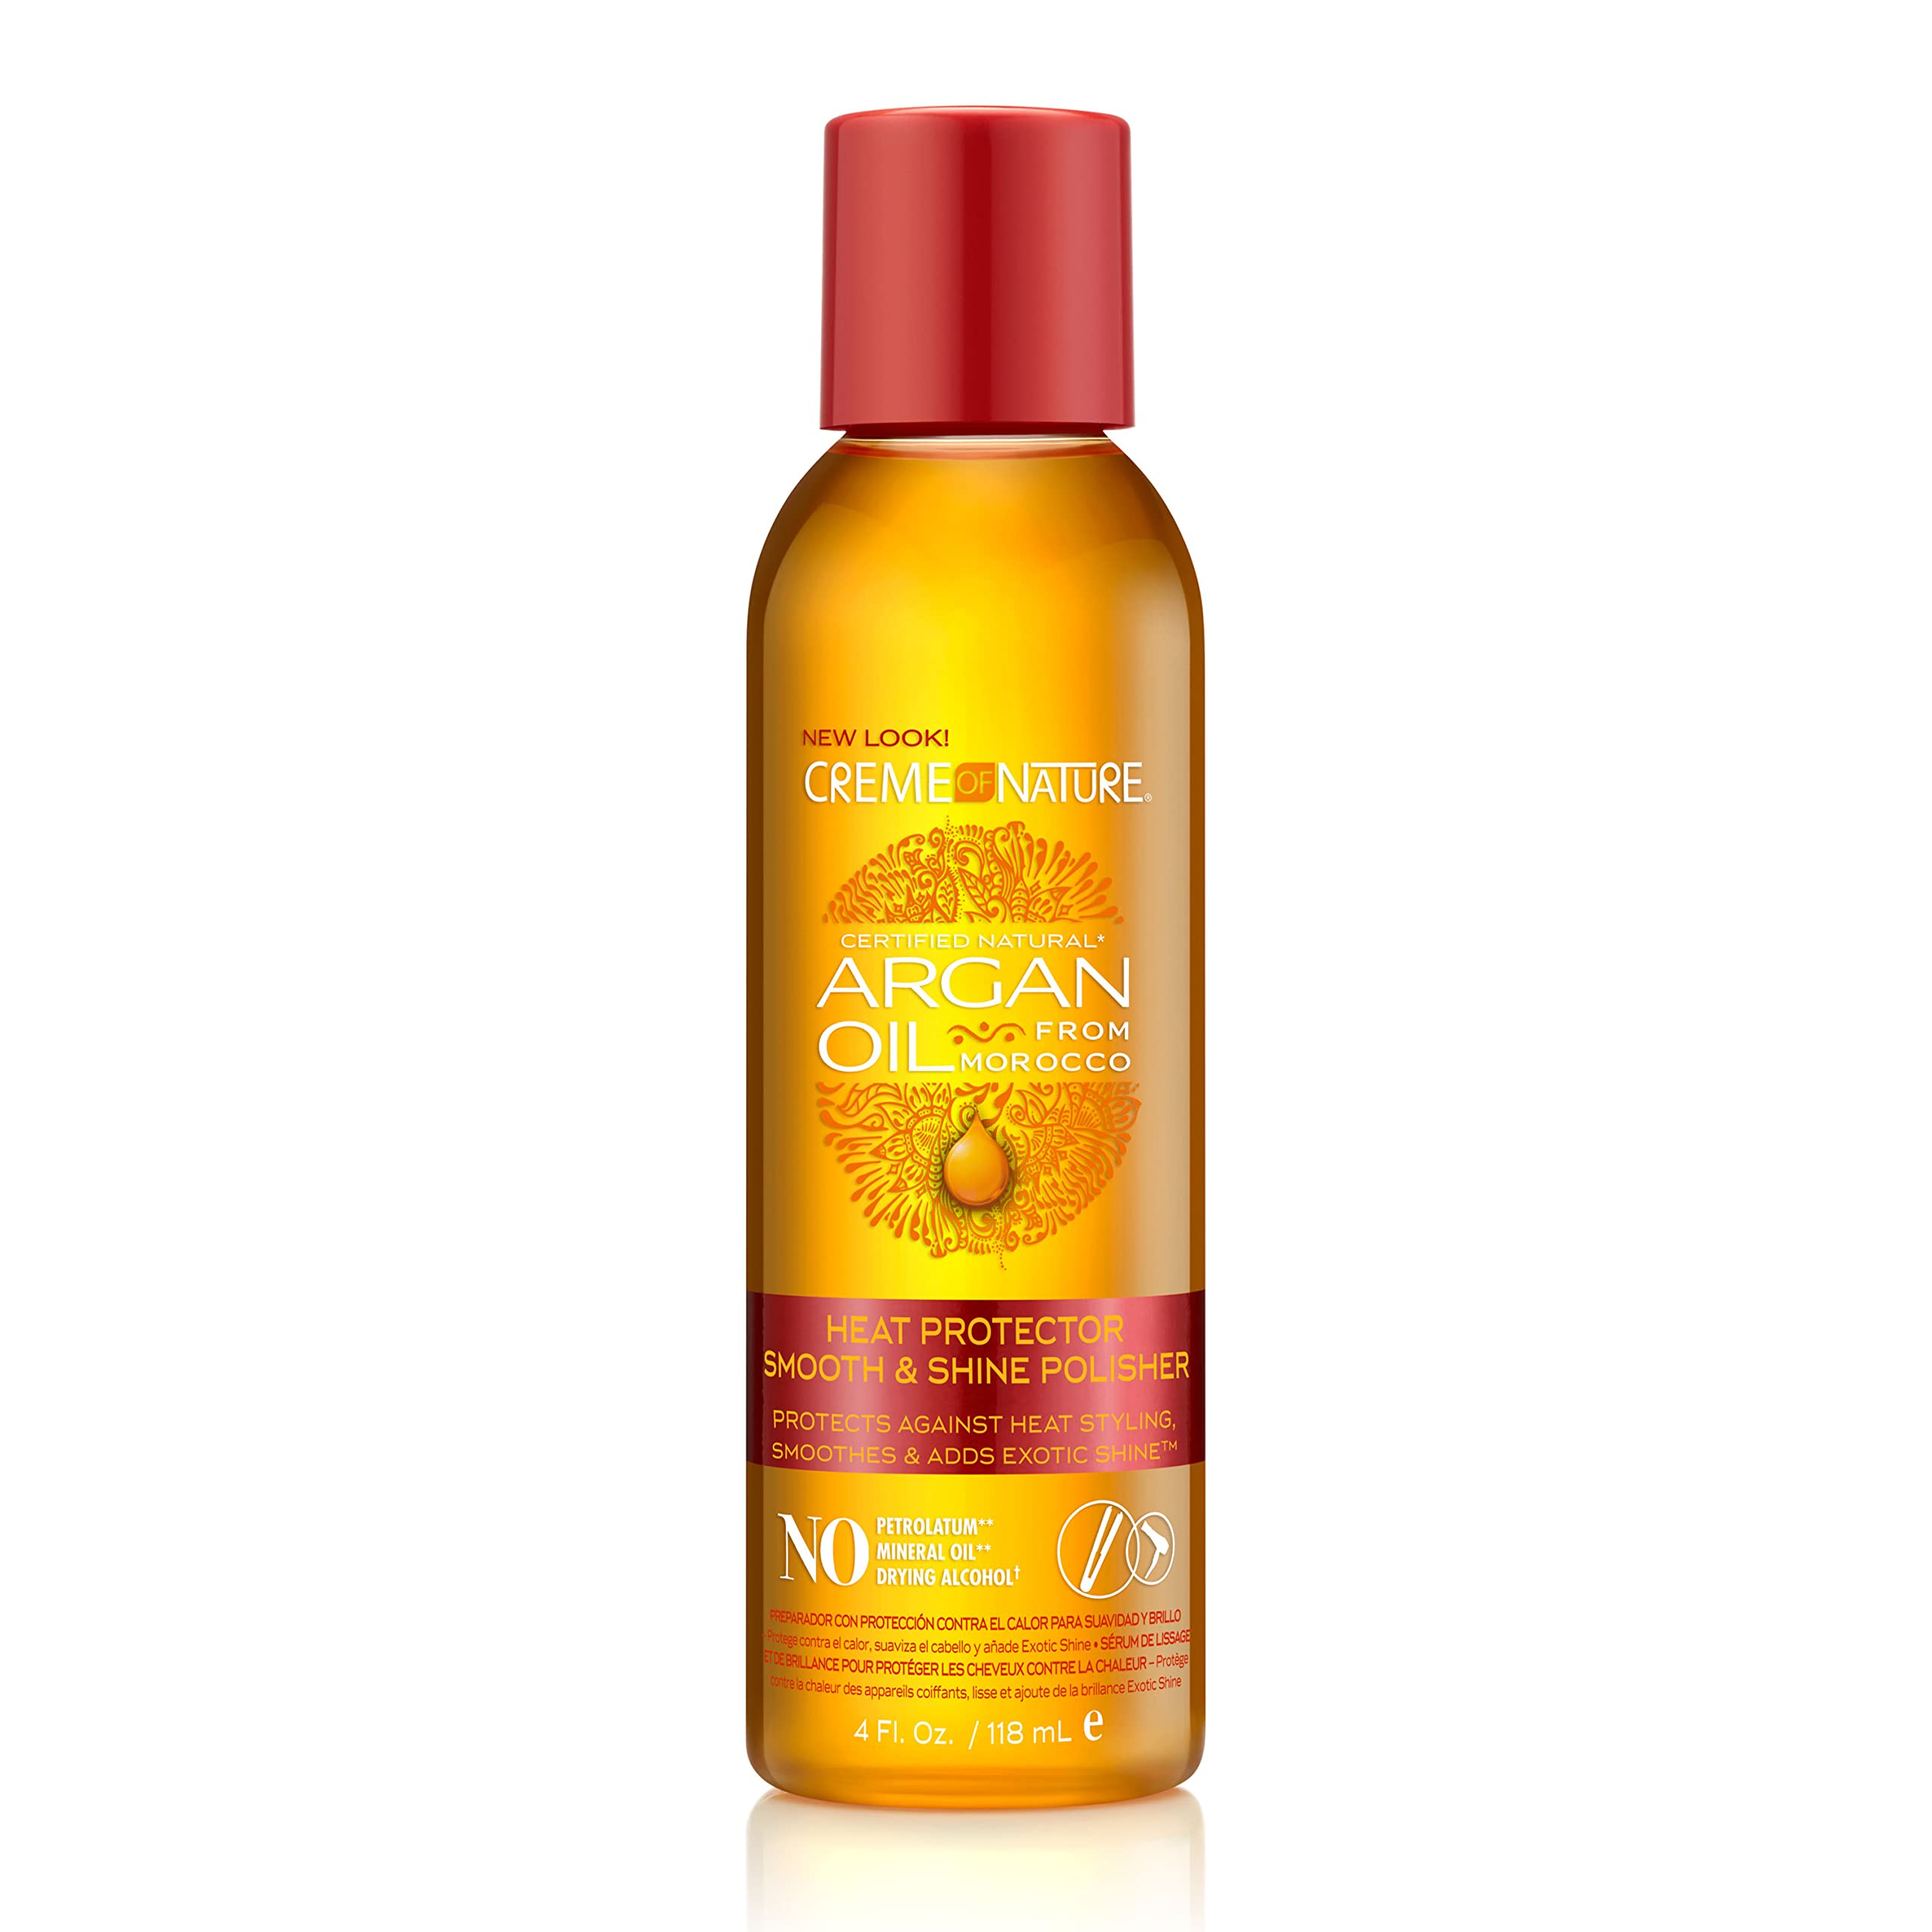 Creme of Nature, Argan Oil for Hair, Smooth & Shine Hair Polisher, Argan Oil of Morocco for Anti Frizz Control, 4 Fl Oz